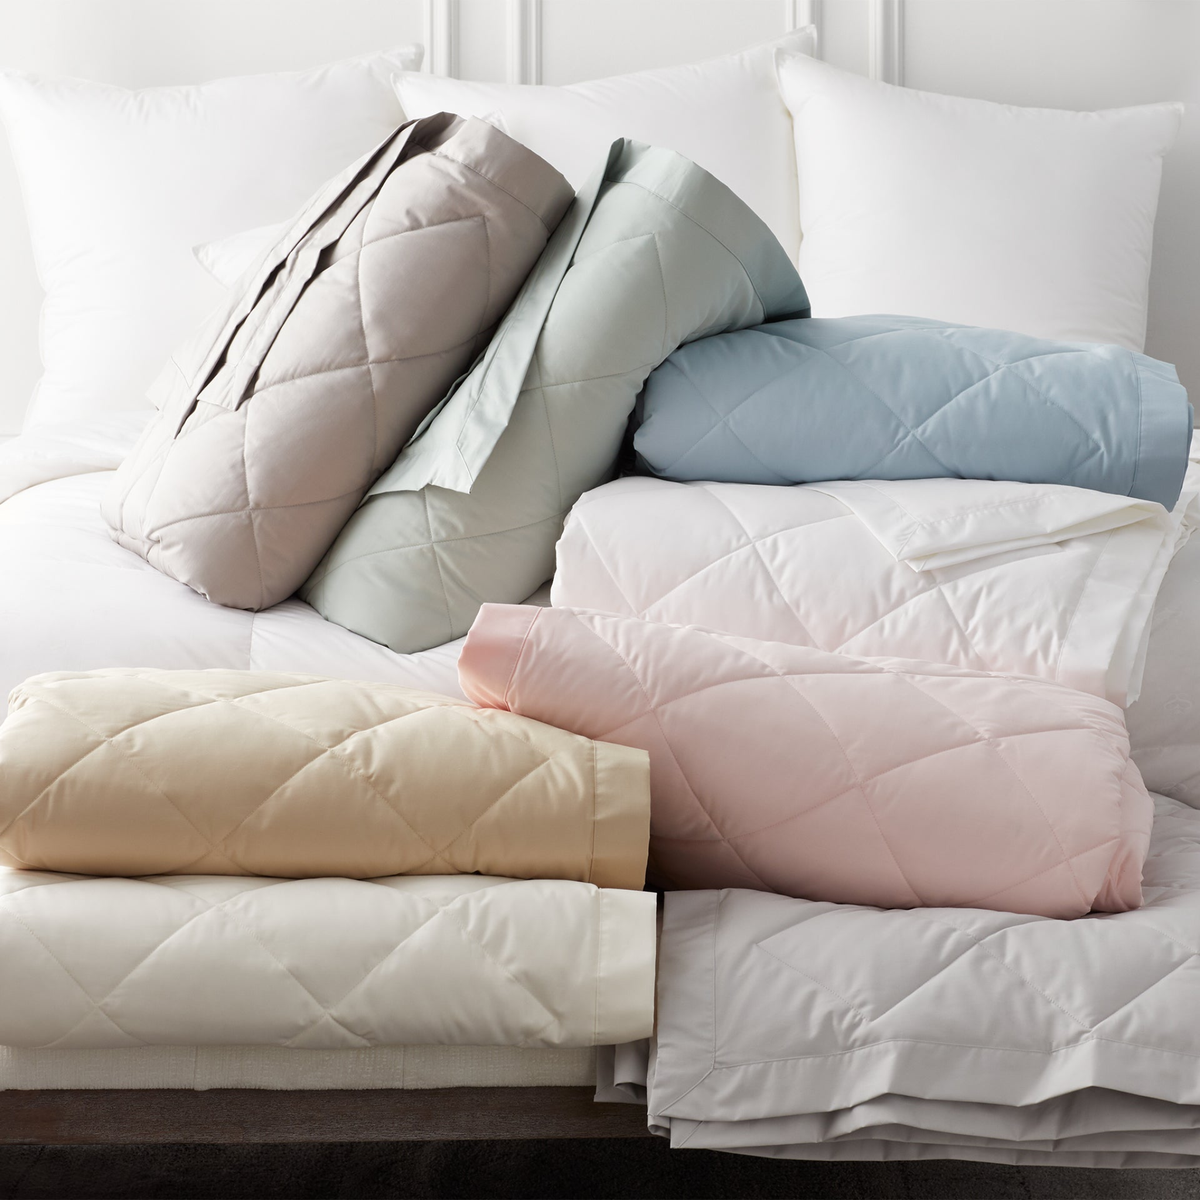 All Colors of Scandia Home Diamond Quilted Down Blankets